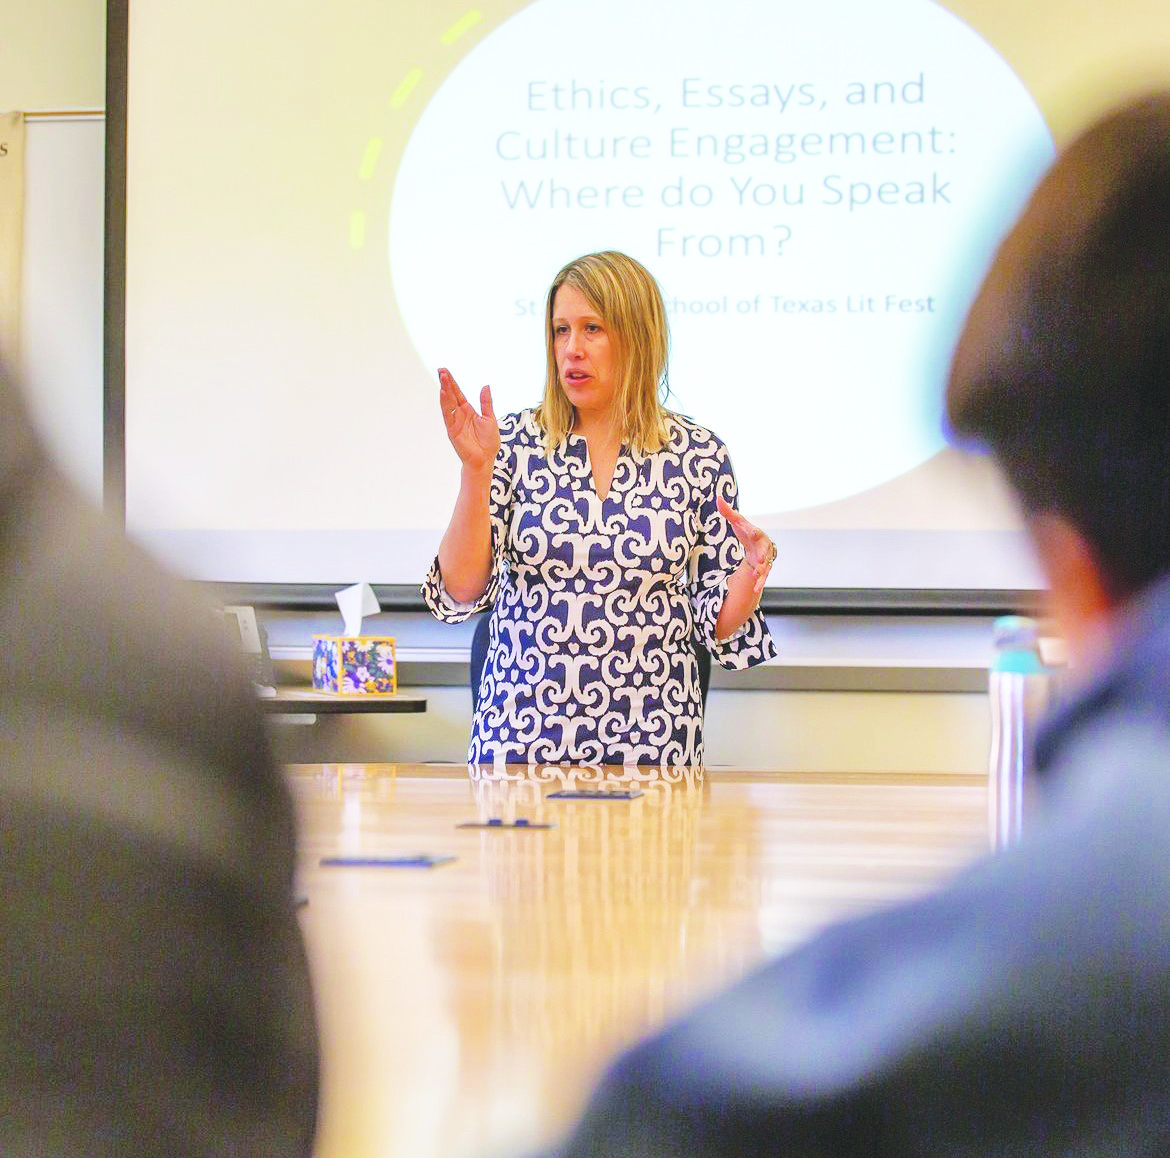 During a presentation to an English 10 class, Dr. Kincaid tells them that ethical work is more personal than academic.